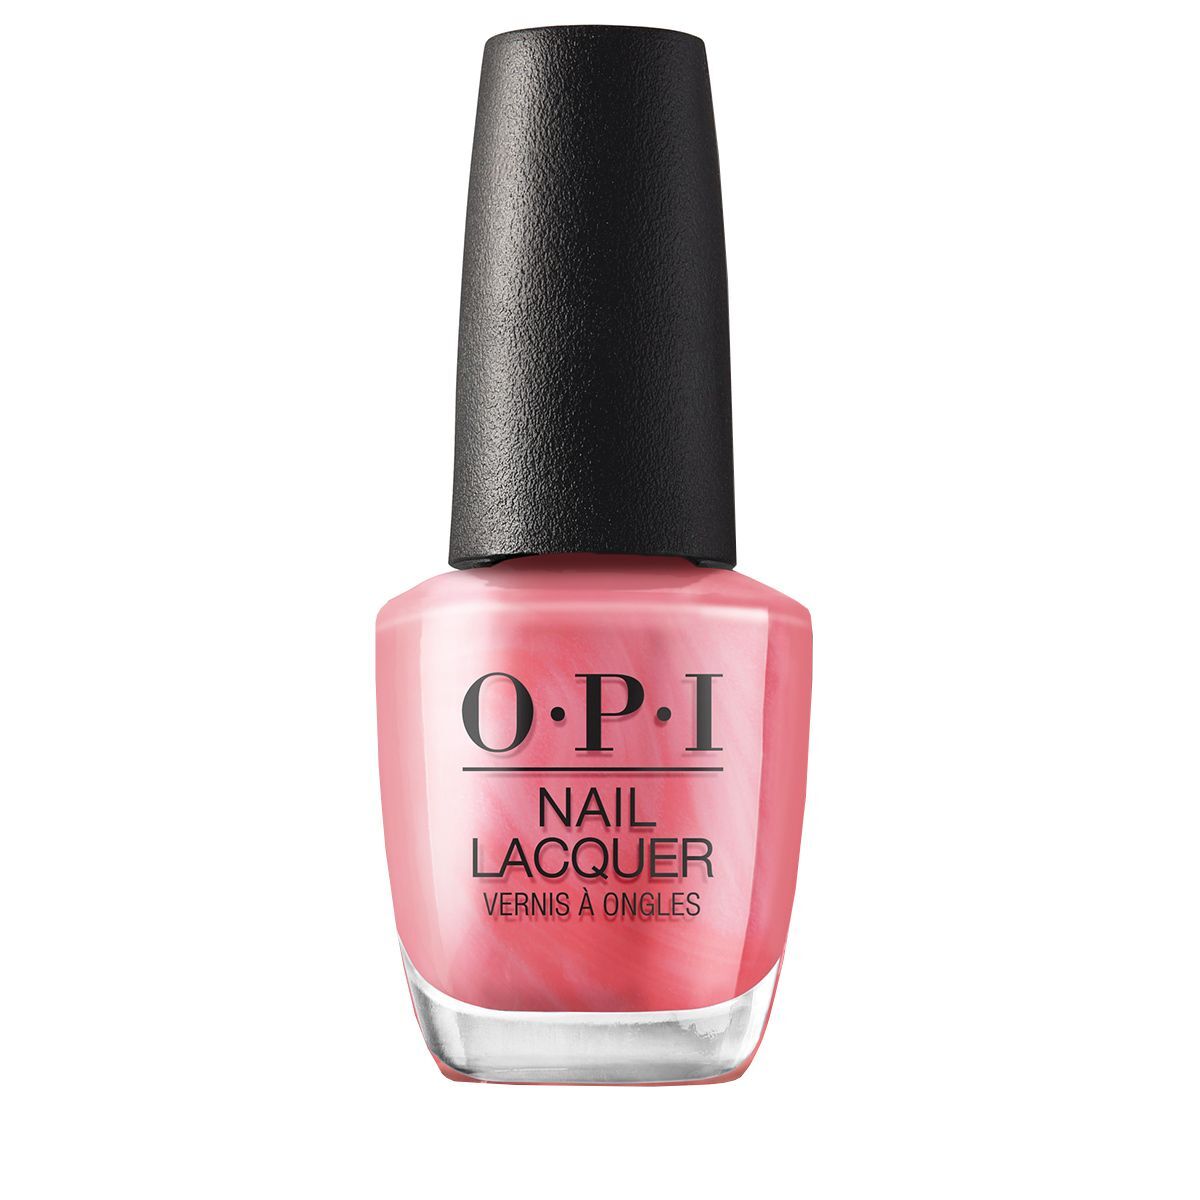 Opi Nail Lacquer This Shade Is Ornamental